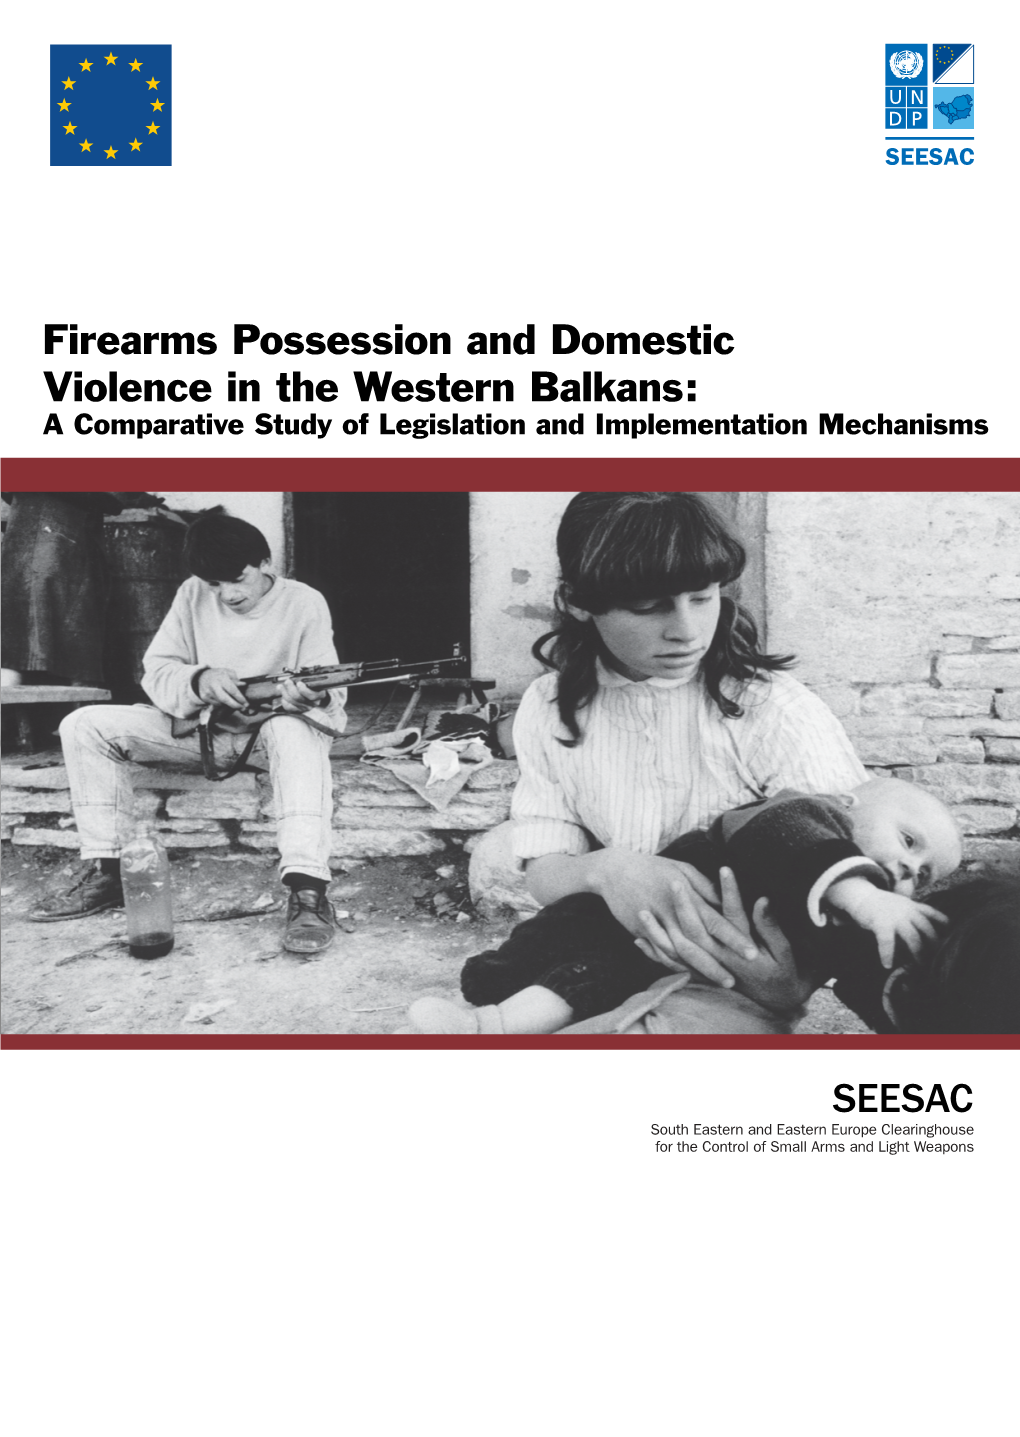 Firearms Possession and Domestic Violence in the Western Balkans: a Comparative Study of Legislation and Implementation Mechanisms